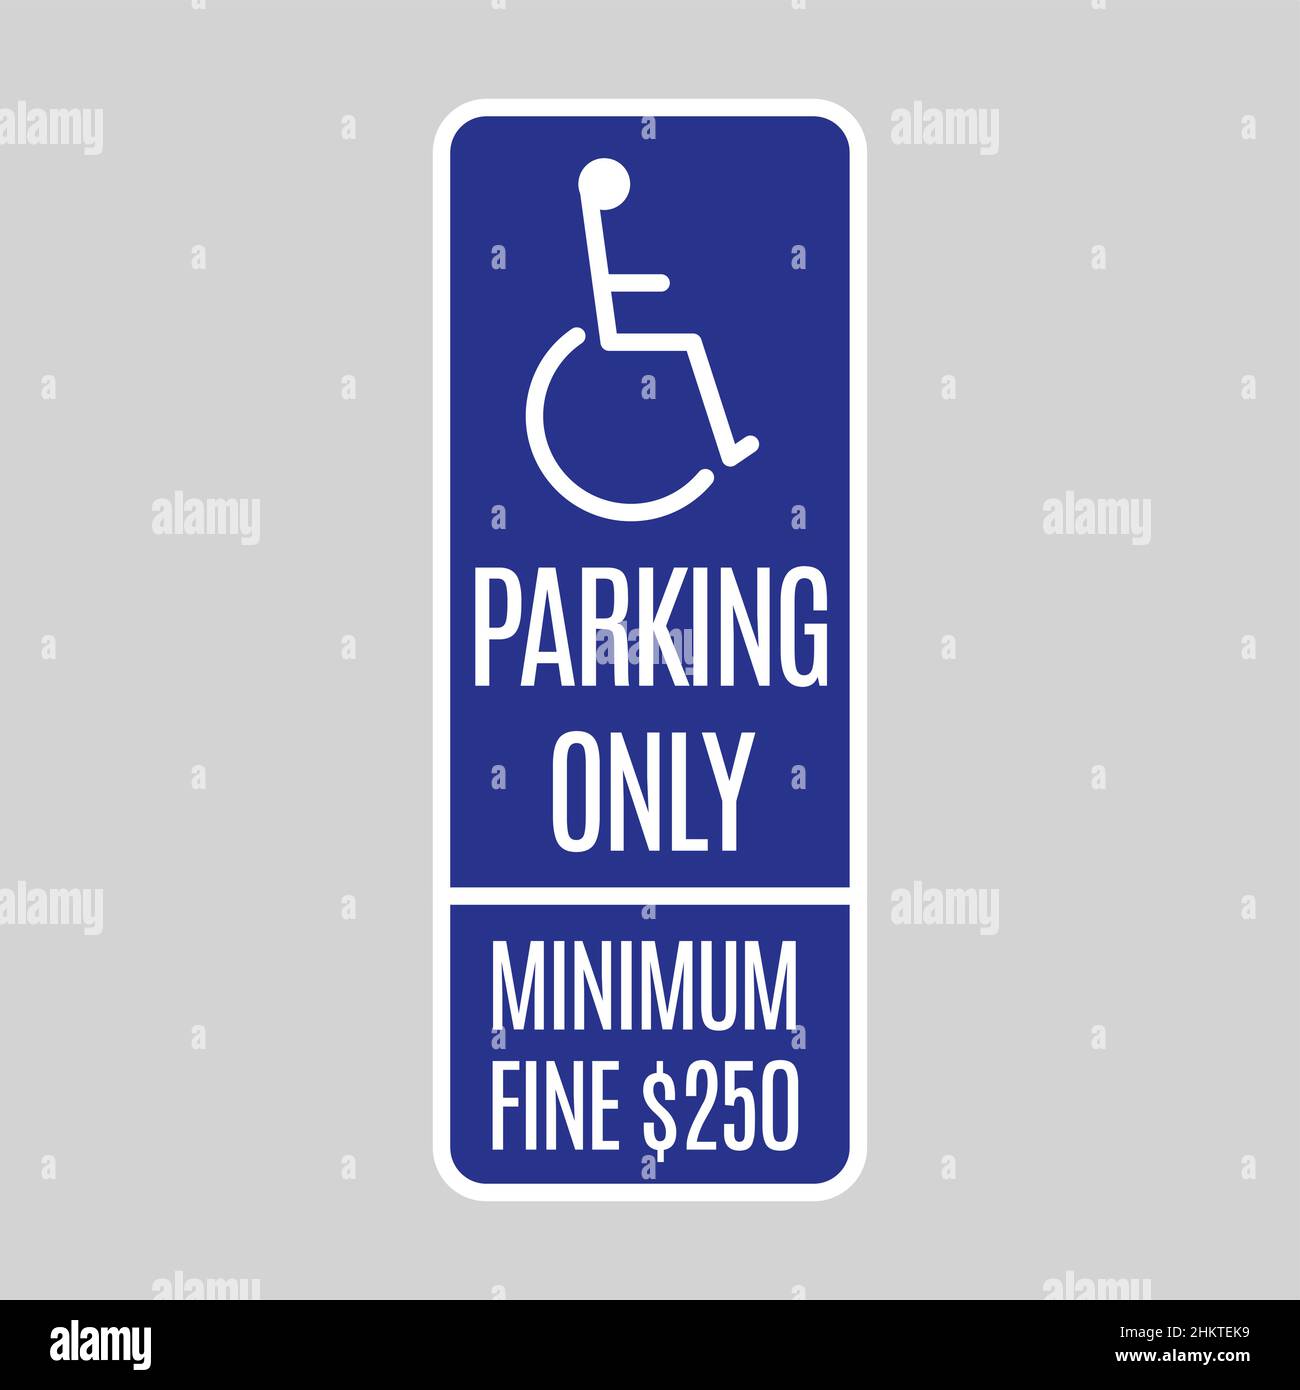 Disabilities Parking only traffic sign. Disabilities person in a wheelchair pictogram. Warning traffic sign in parking lot. 250 dollars fine message Stock Vector